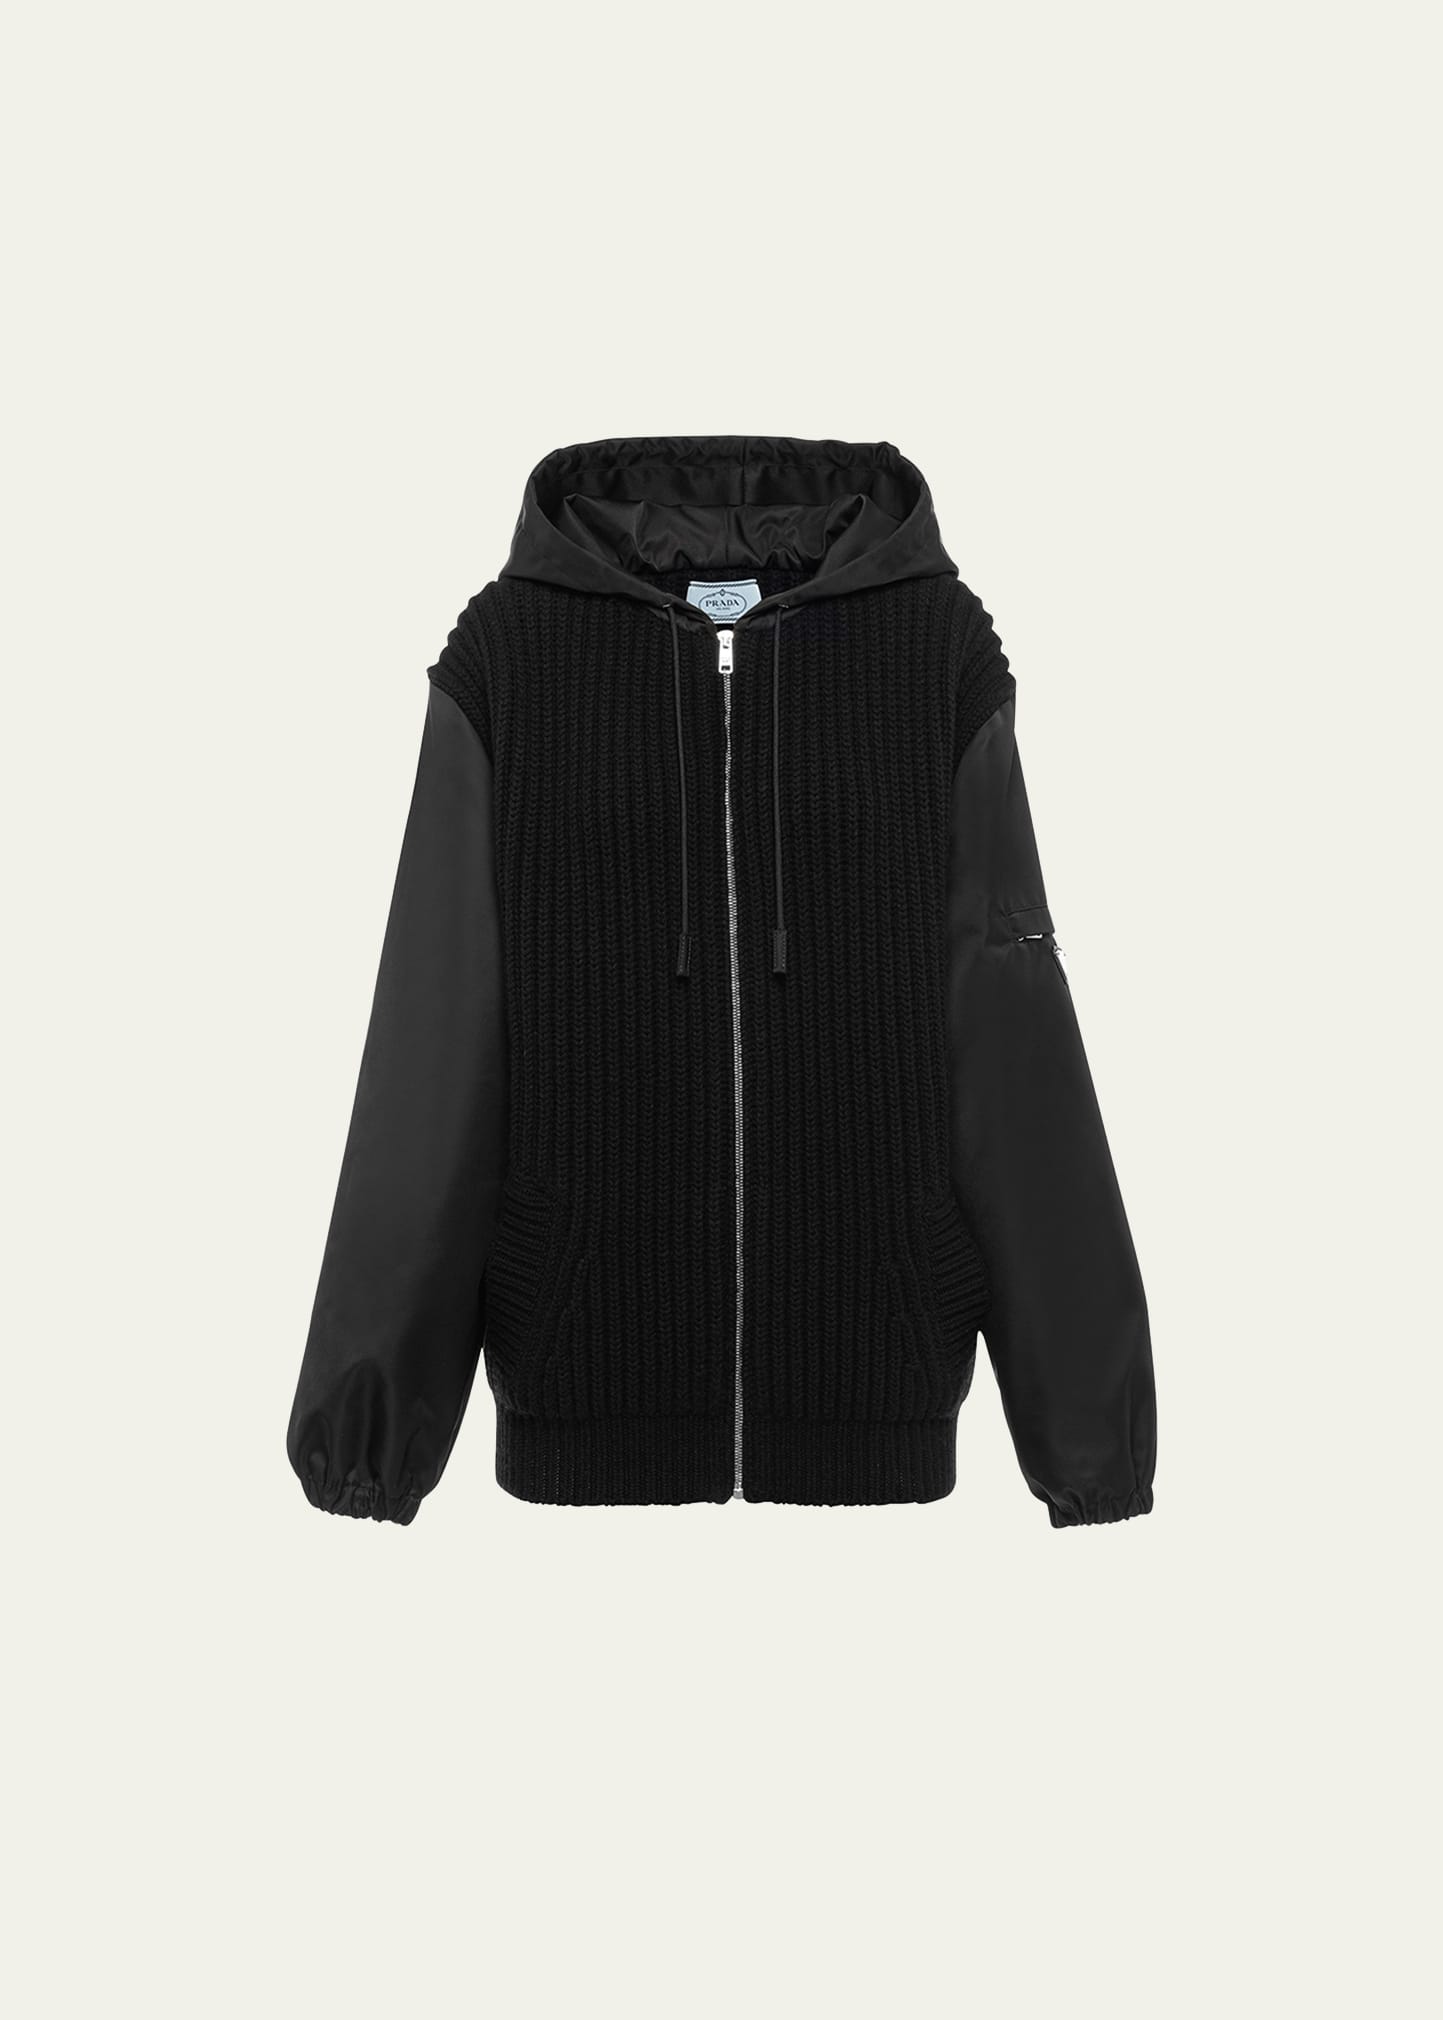 Cashmere Zip Front Jacket with Re-Nylon Sleeves